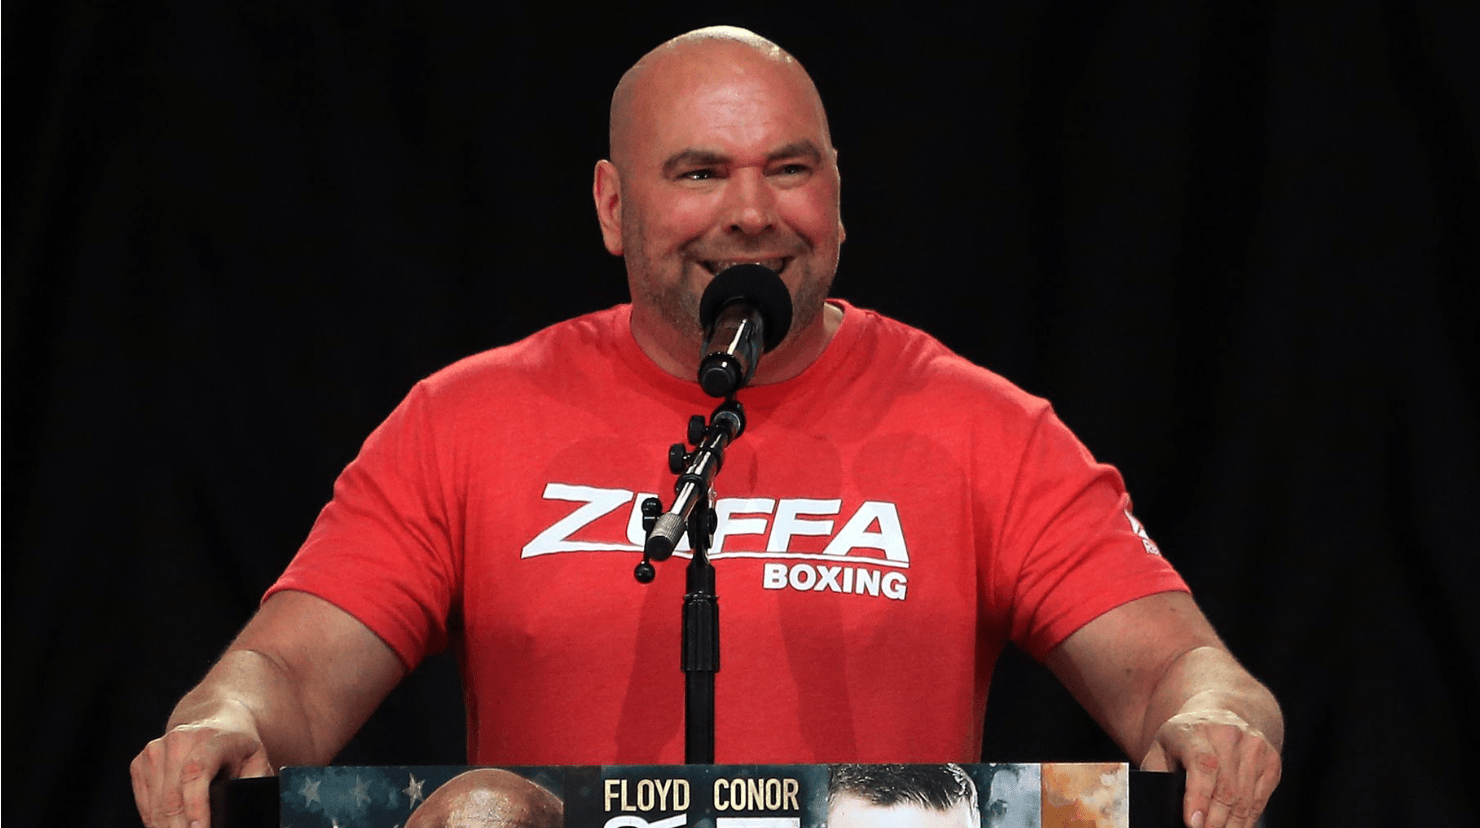 Dana White Wants To Fix The Pay System In Boxing